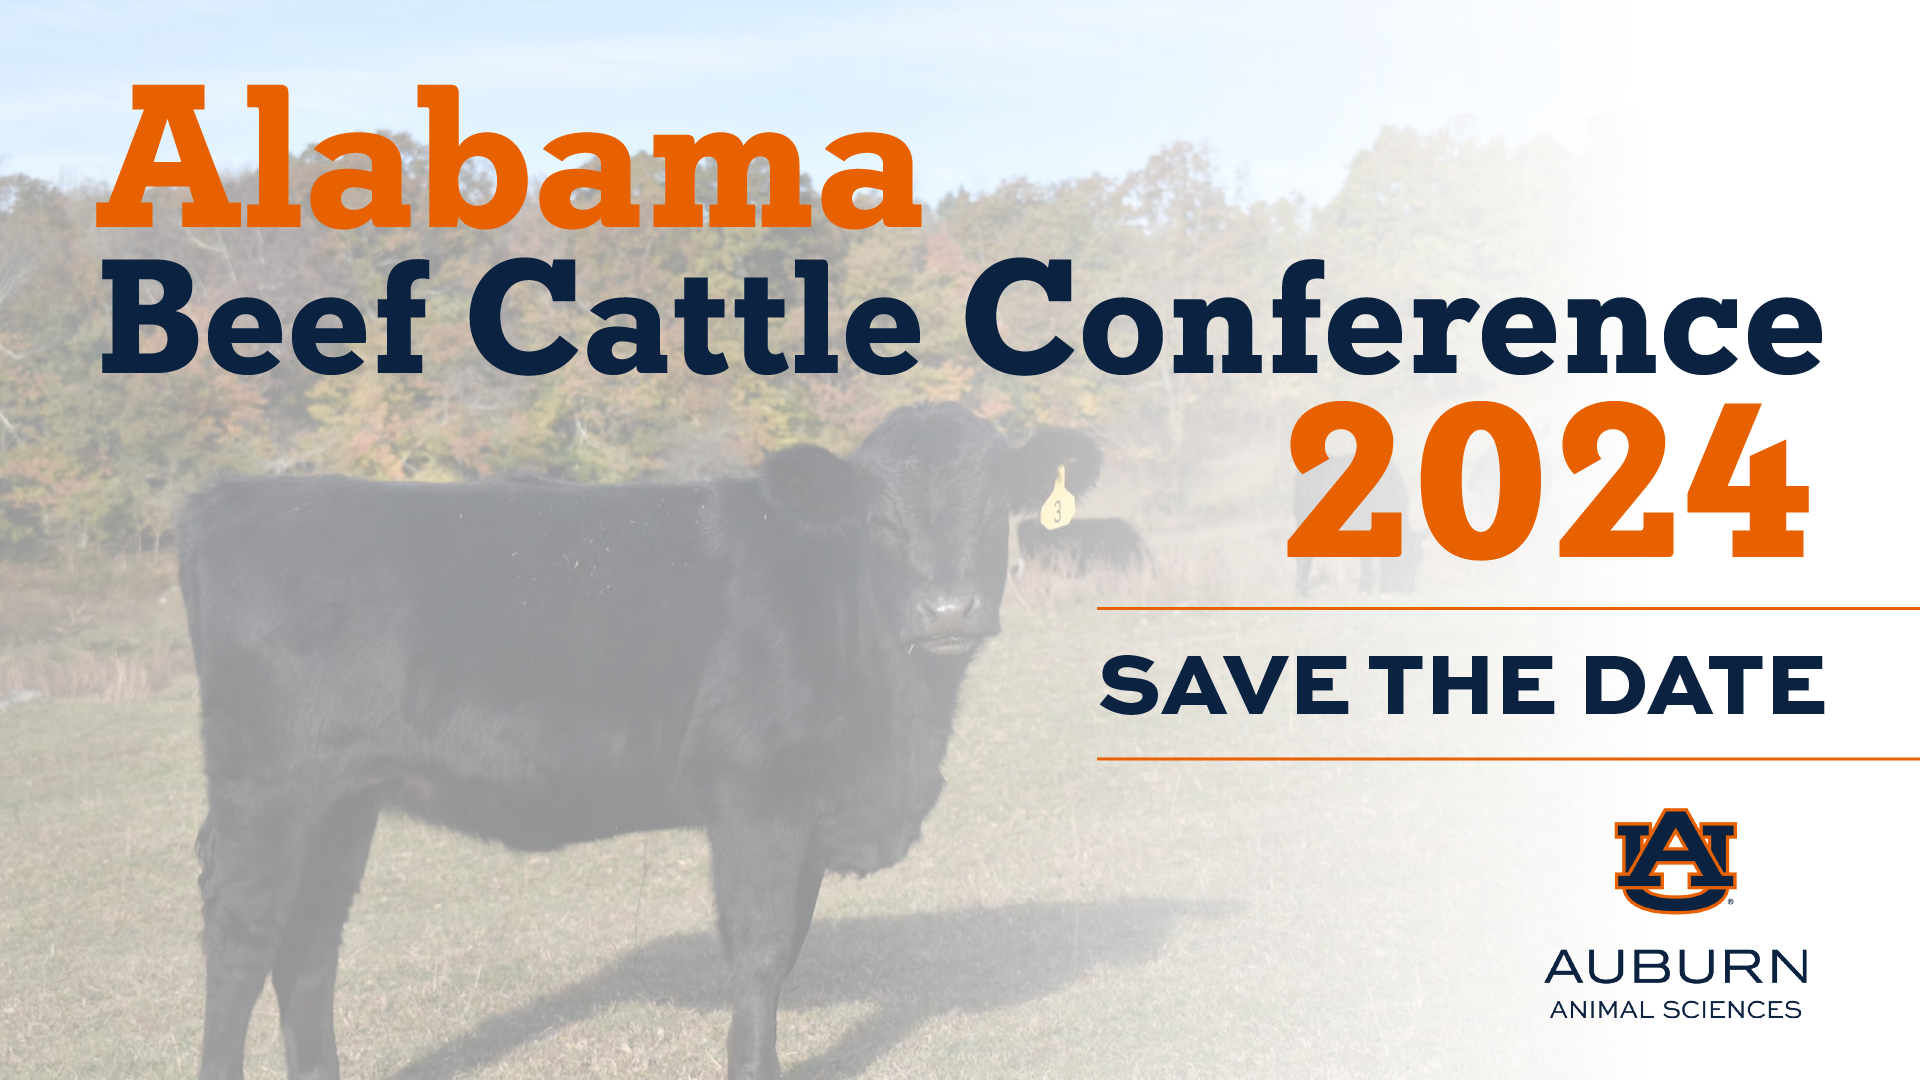 Auburn-Agriculture-Beef-Cattle-Conference-Save-the-Date-2024